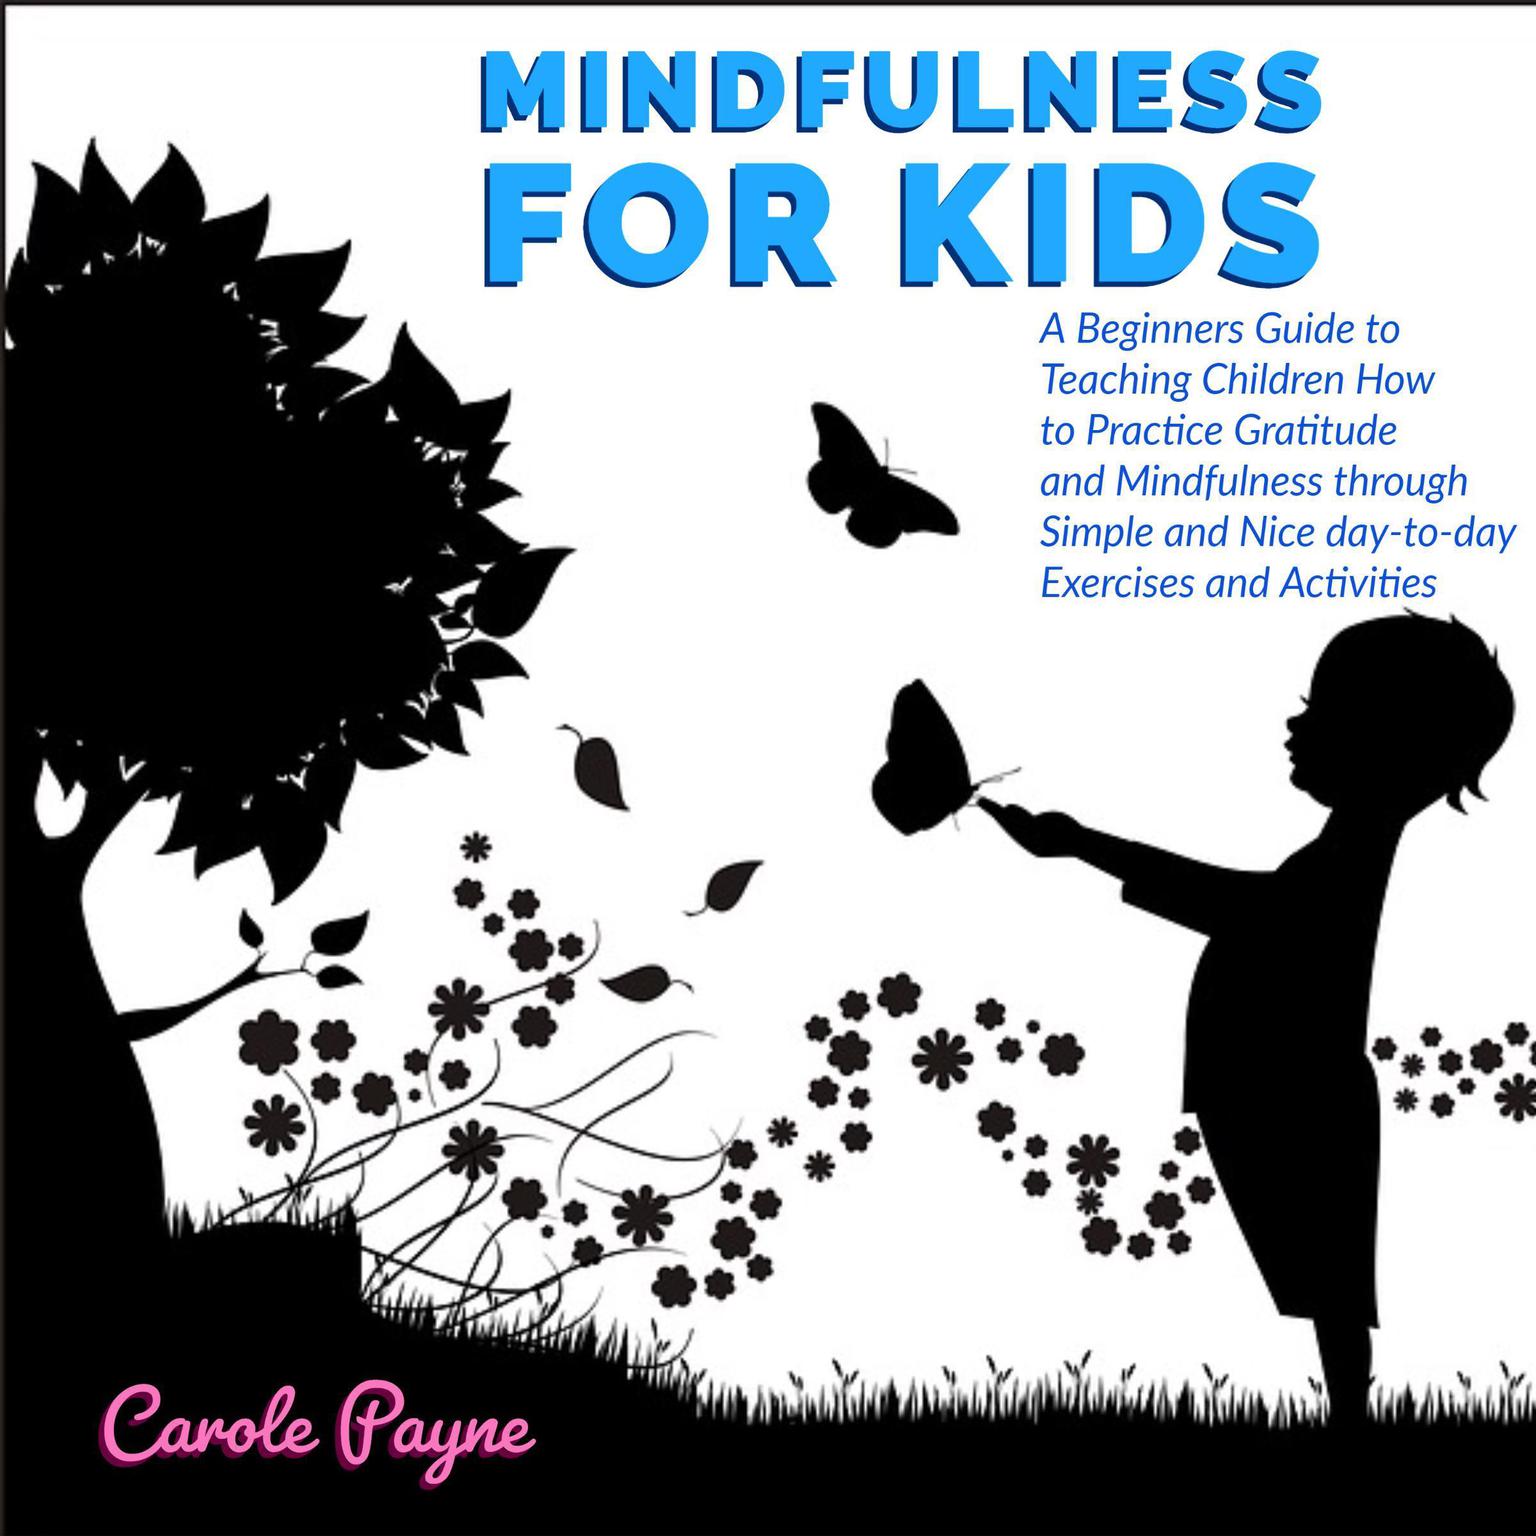 Mindfulness For Kids: A Beginners Guide to Teaching Children How to Practice Gratitude and Mindfulness through Simple and Nice day-to-day Exercises and Activities Audiobook, by Carole Payne